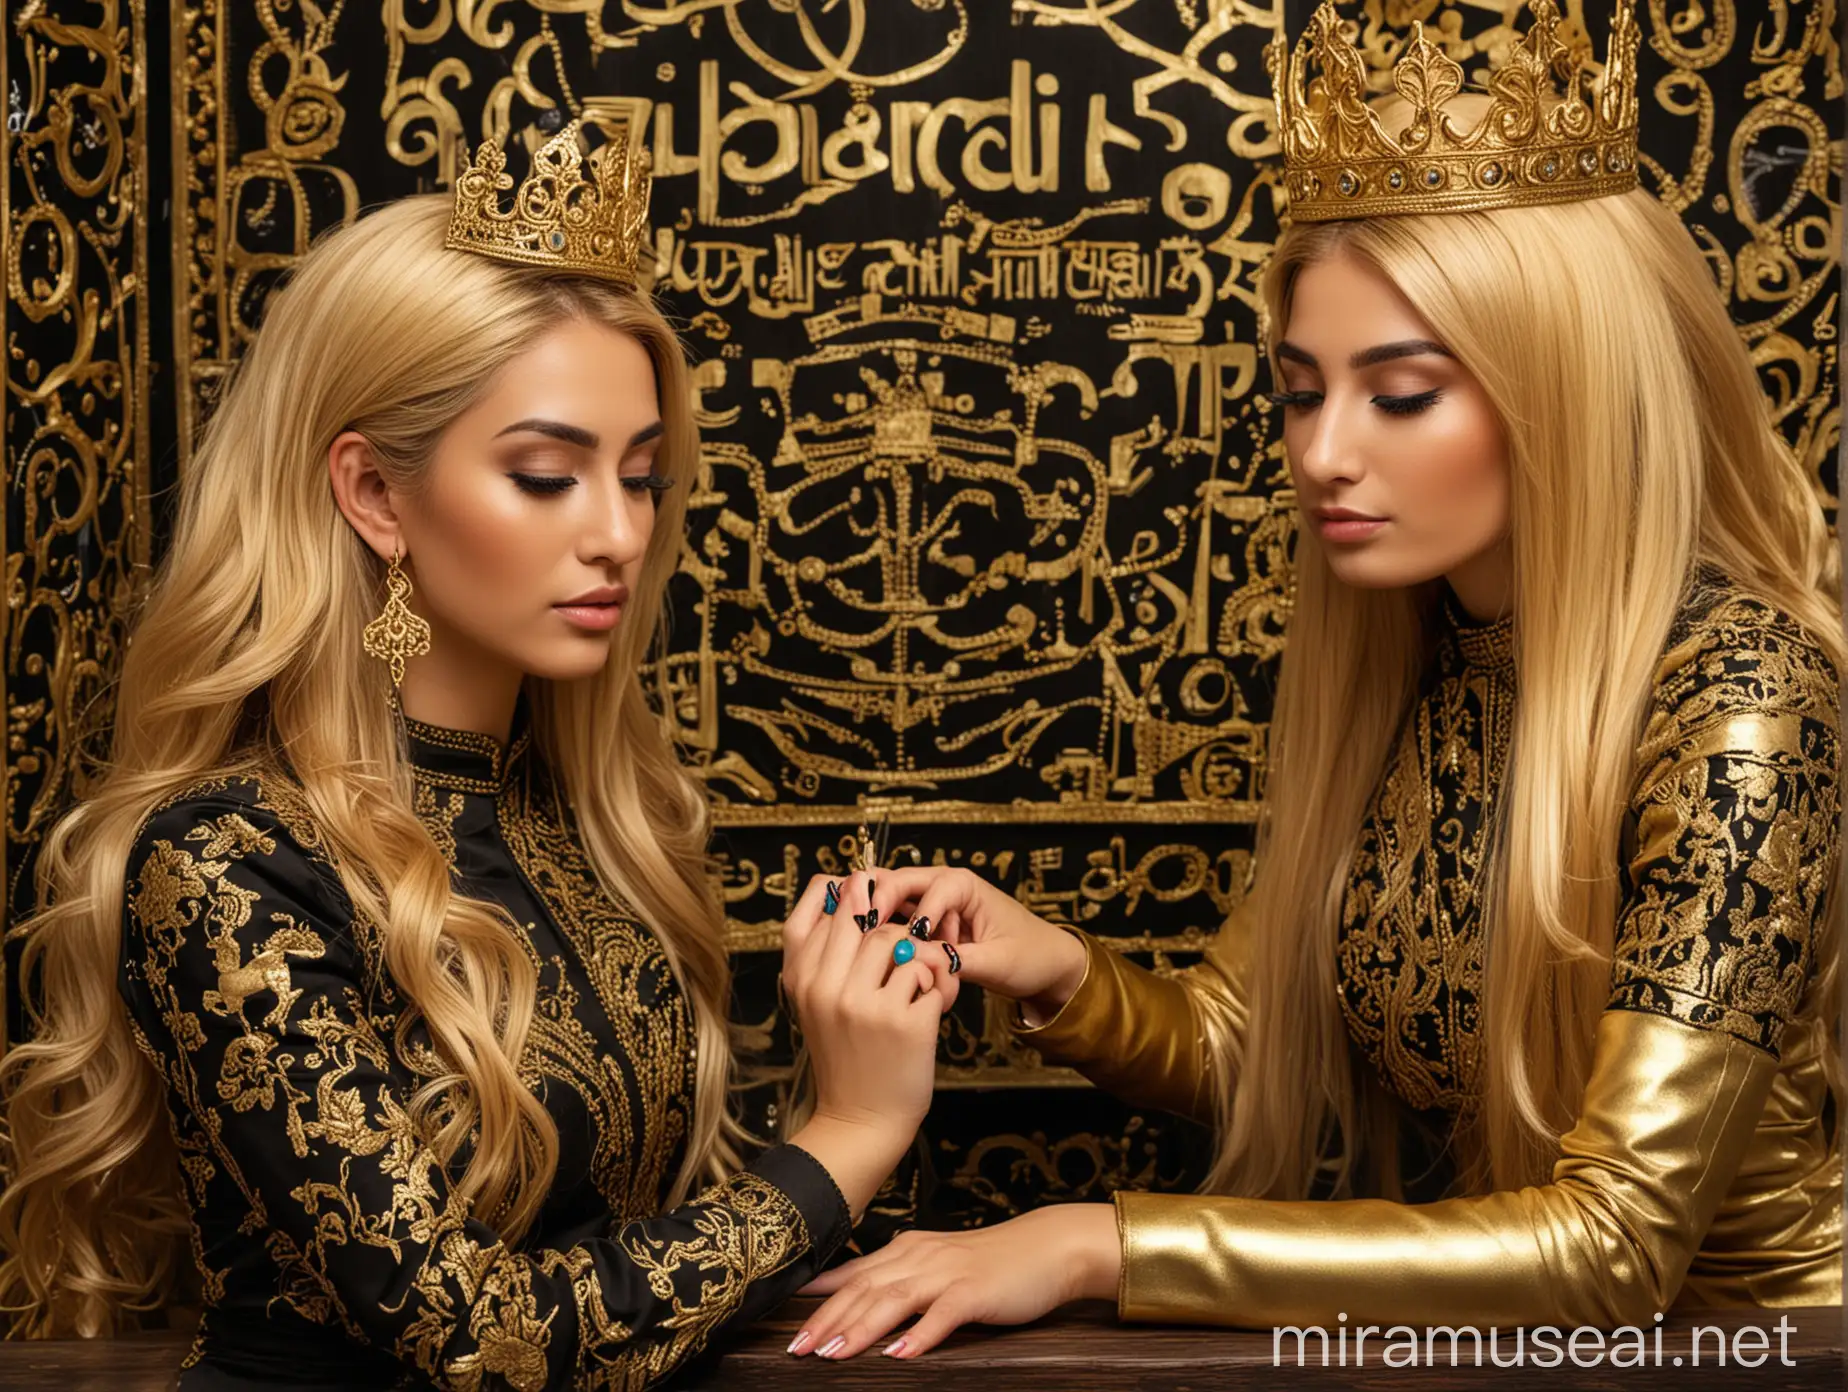 A female hairdresser applying artificial nails to a beautiful Iranian woman, long golden hair, wearing a stylish dress, black and gold lace  The face, crown and hair of the beautician and woman should be clearly defined, and the nail technician should have a nail implant tool in his hand.  Gold and black background with horse design  Behind the ladies is a black neon sign that says: Amadai  On the table is a large golden standing horse statue